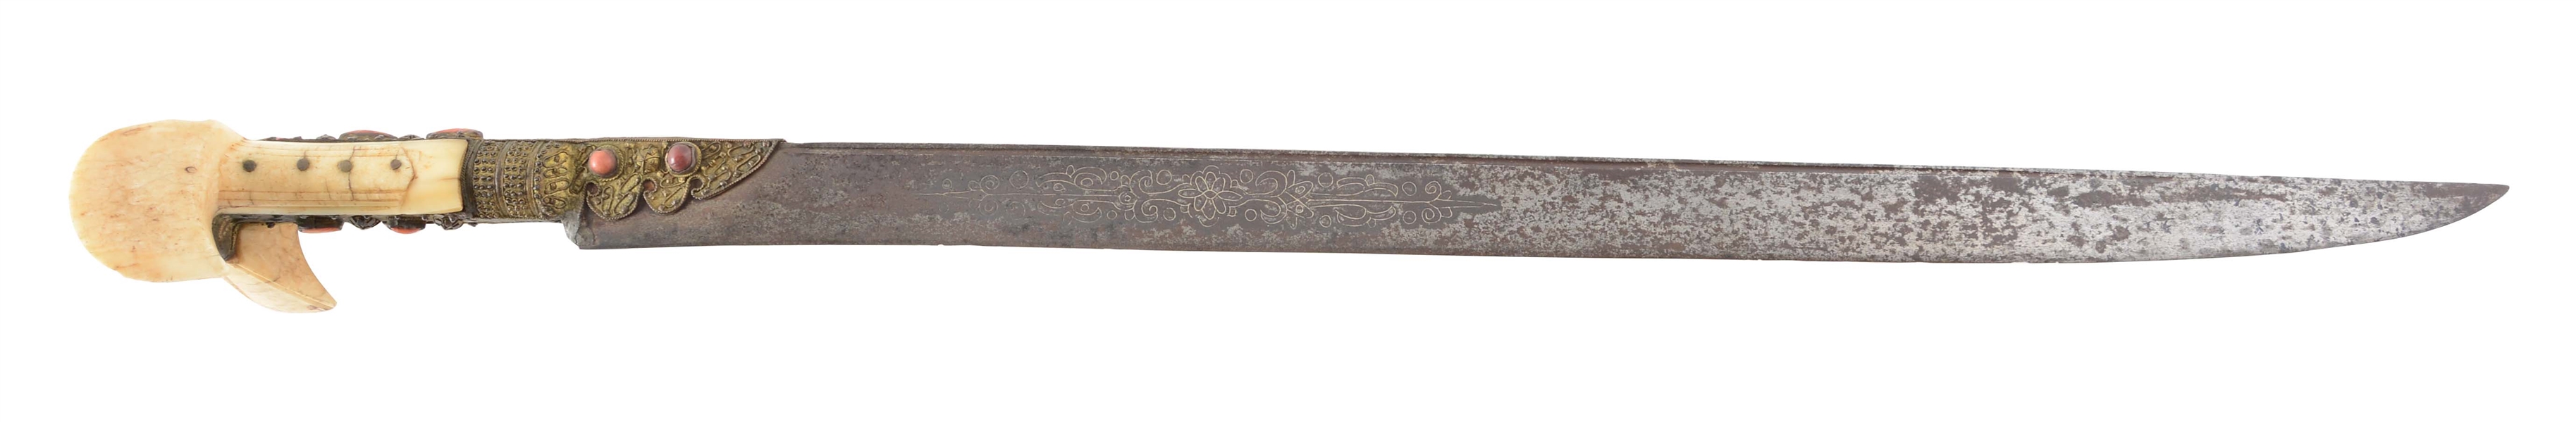 GOOD & UNUSUALLY LONG IVORY HILTED YATIGAN WITH SILVER INLAID BLADE & WALRUS IVORY SCALES. 